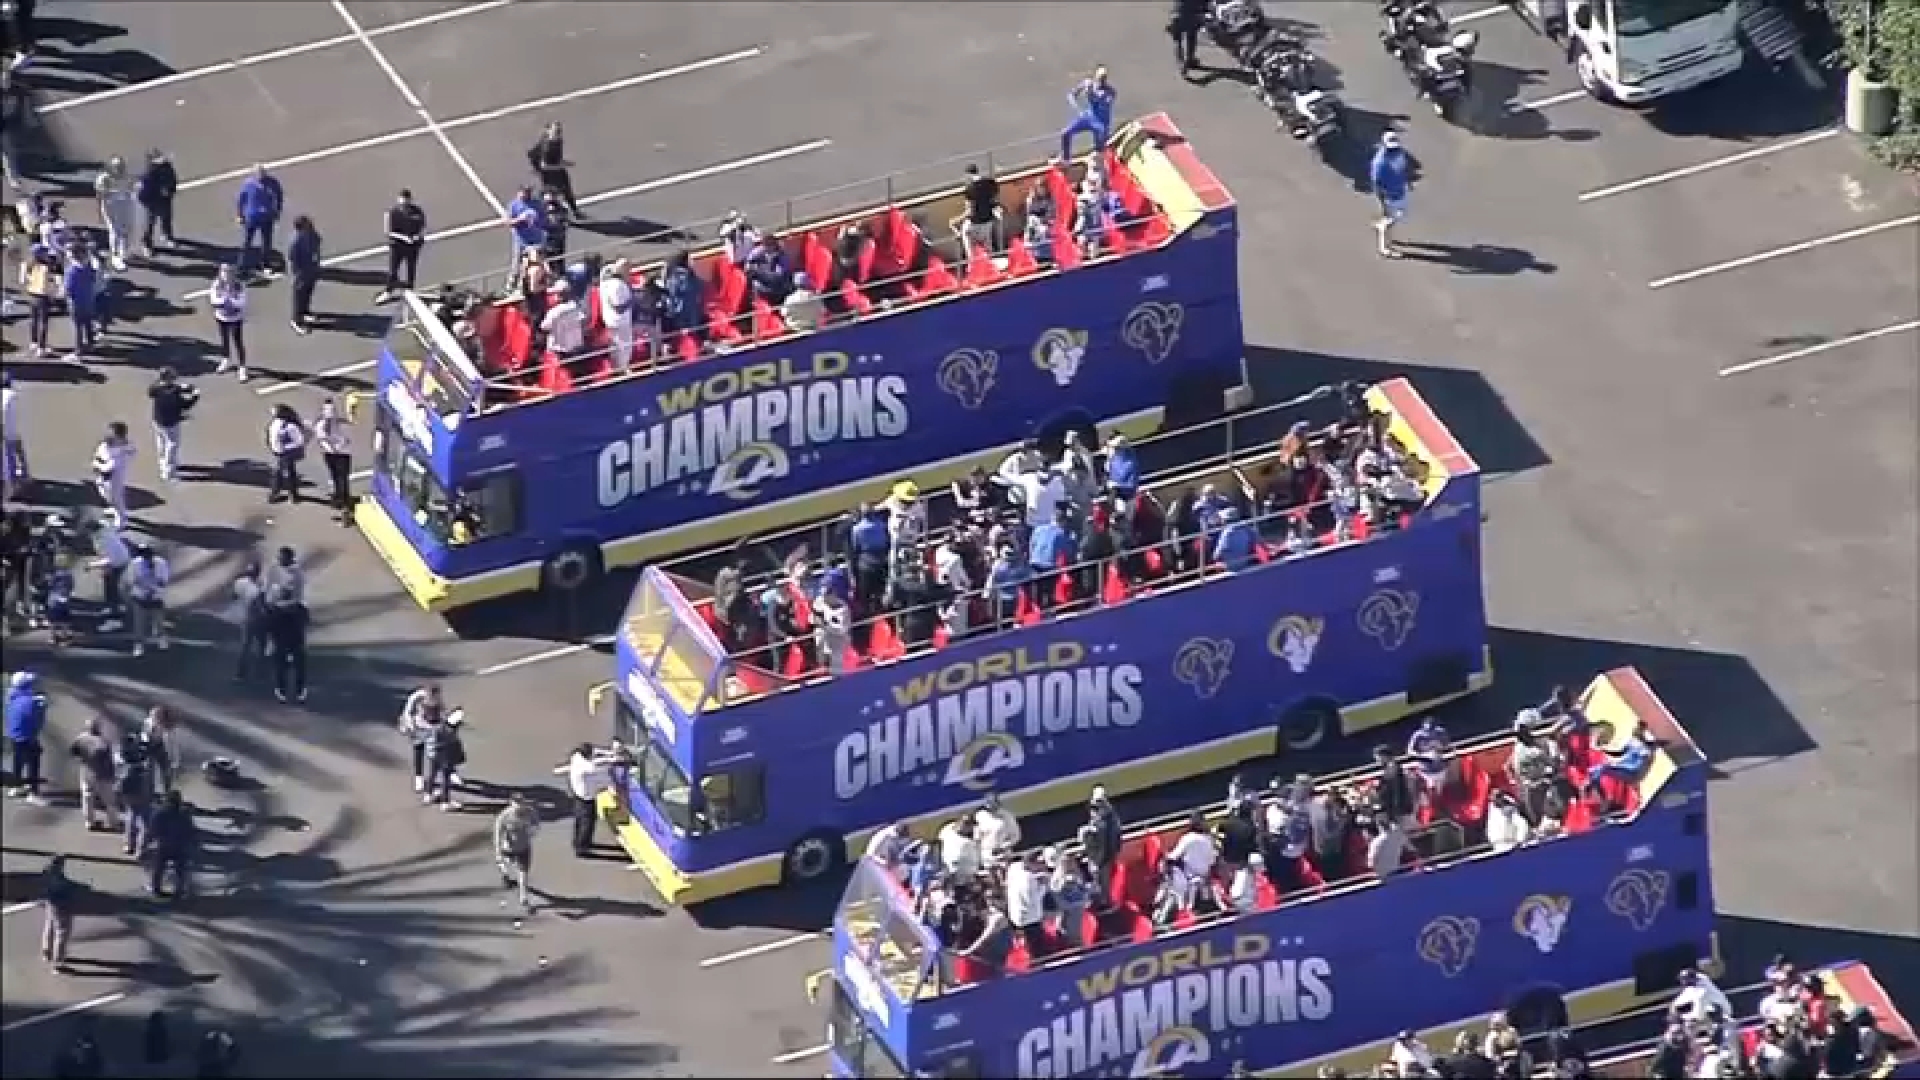 Rams Super Bowl Parade route, schedule: Wednesday in downtown LA - Turf  Show Times